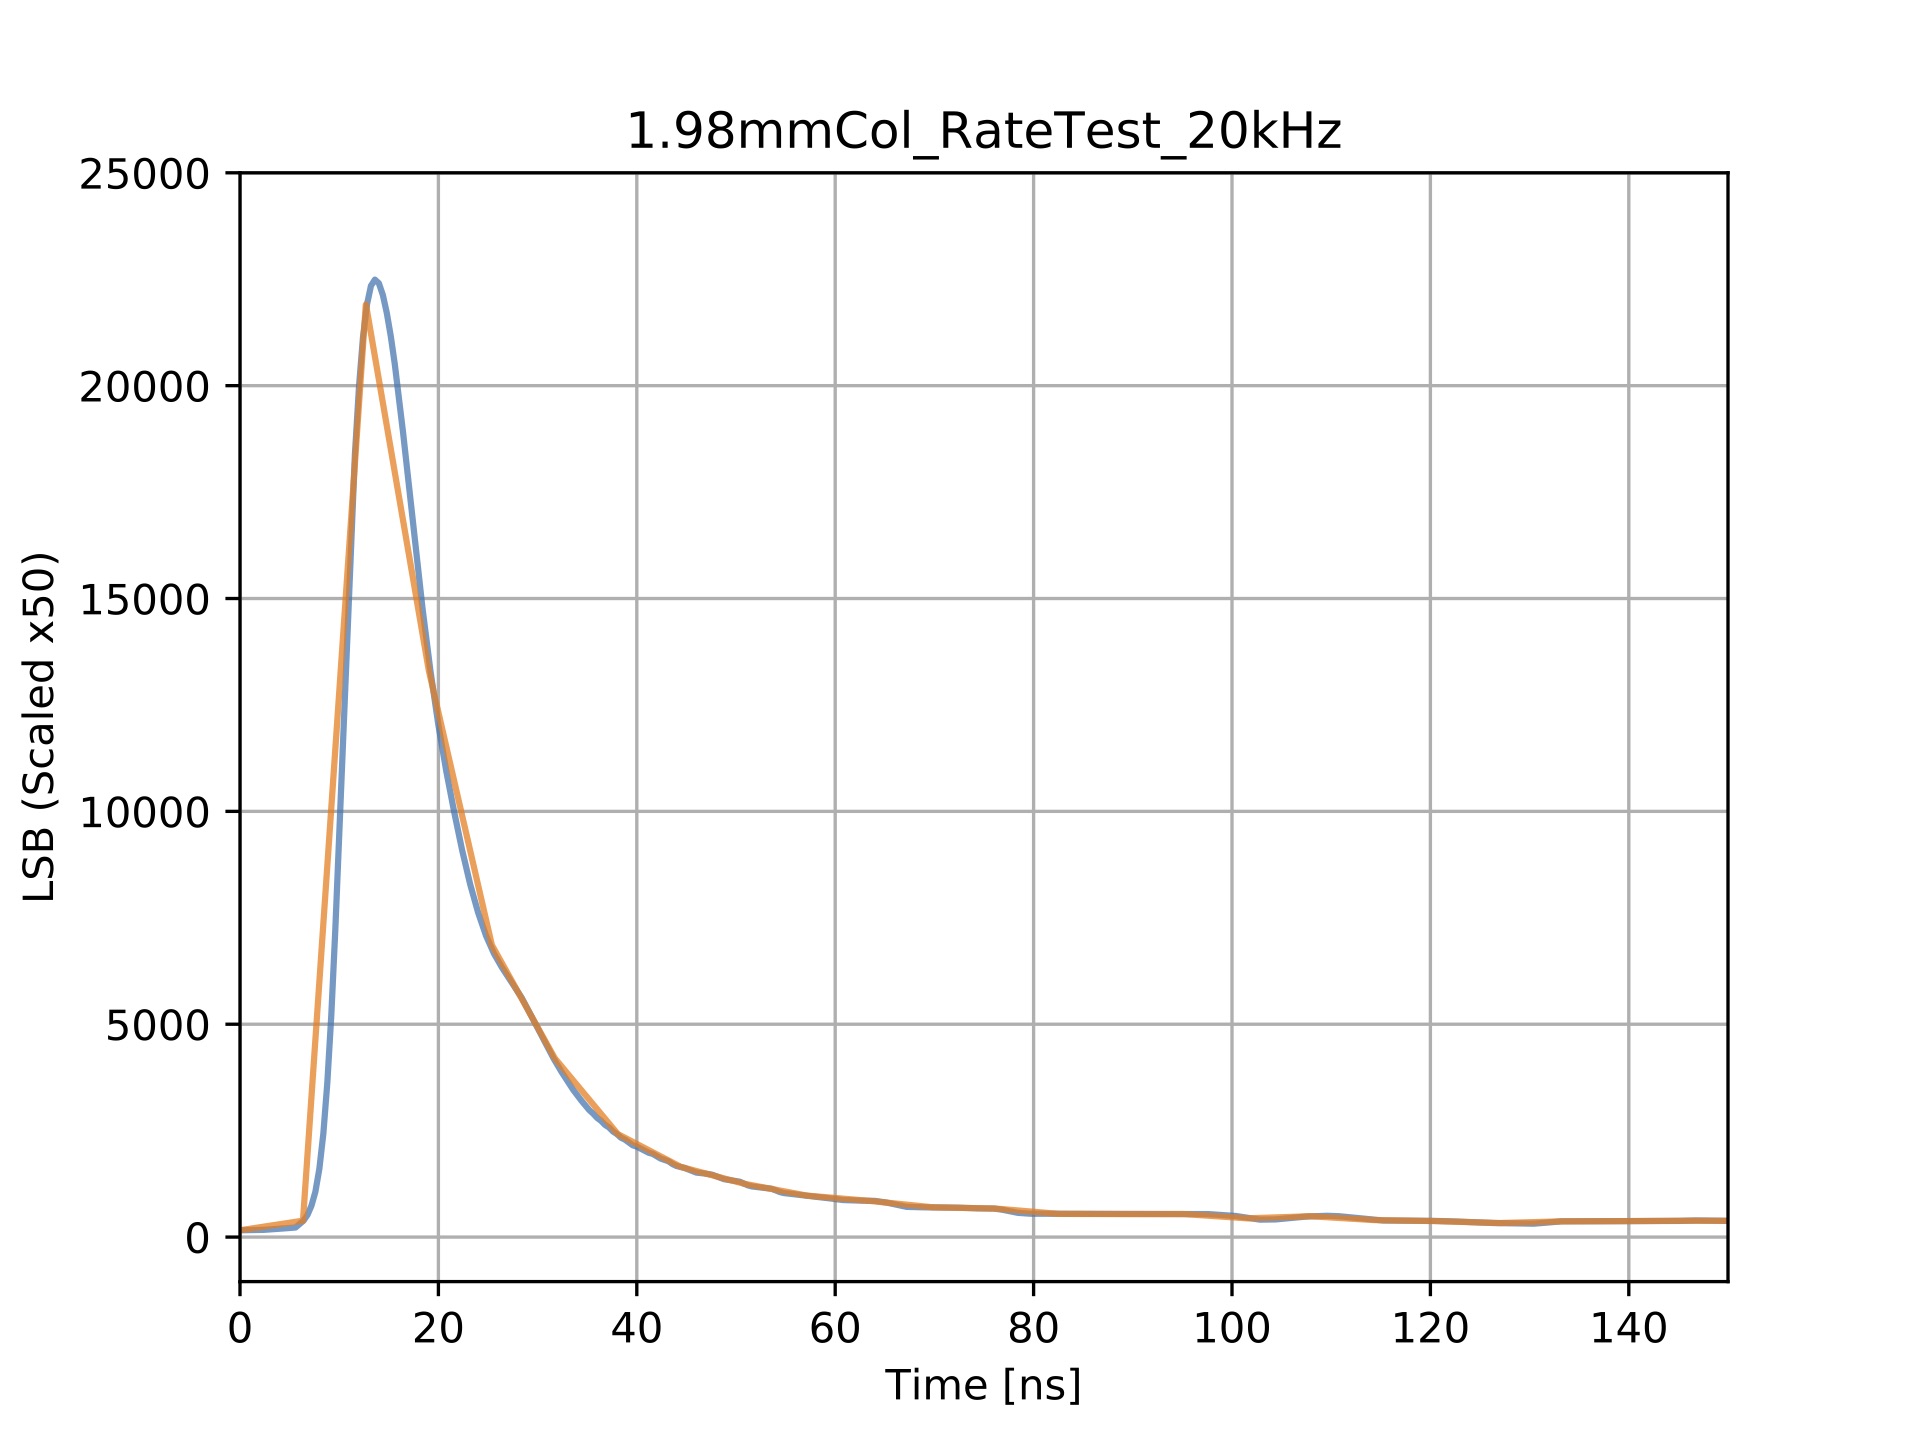 1.98mmCol_RateTest_20kHz_Sc50_ResCompare.jpg